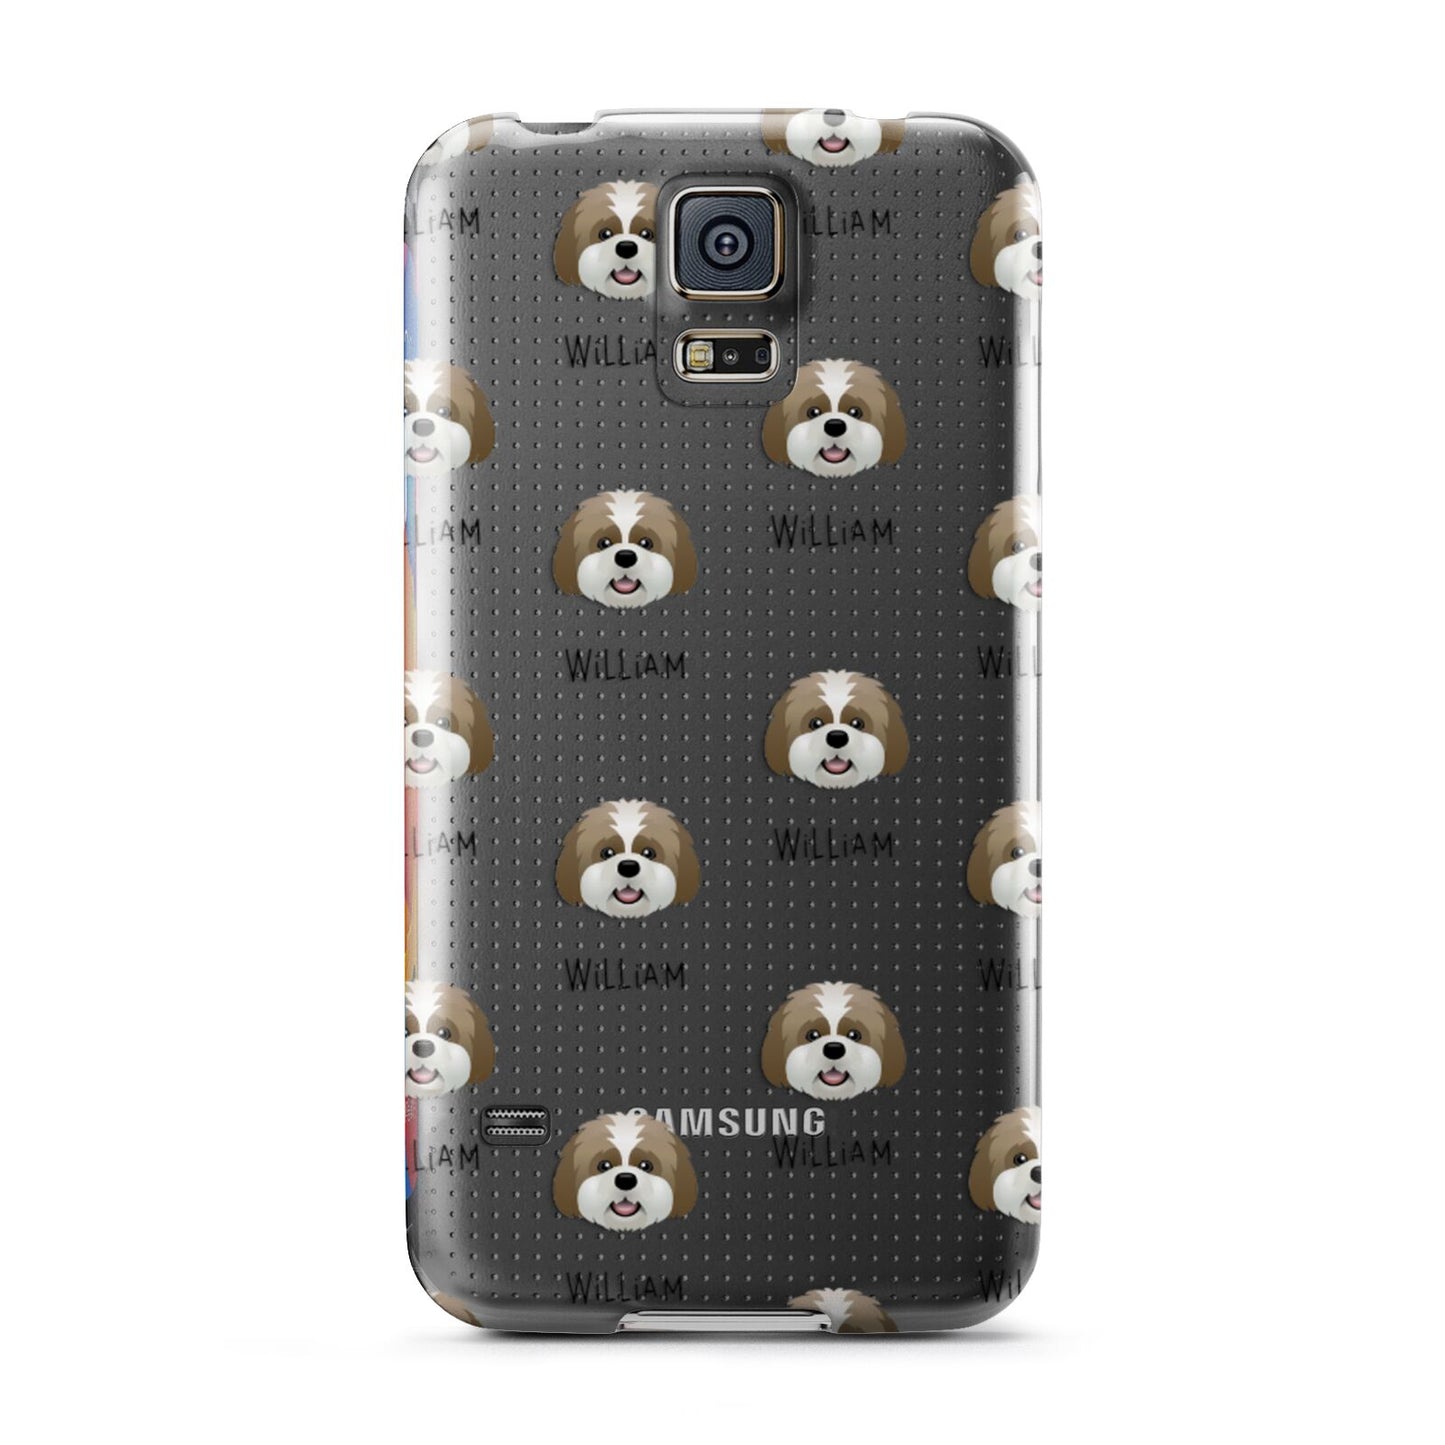 Lhatese Icon with Name Samsung Galaxy S5 Case